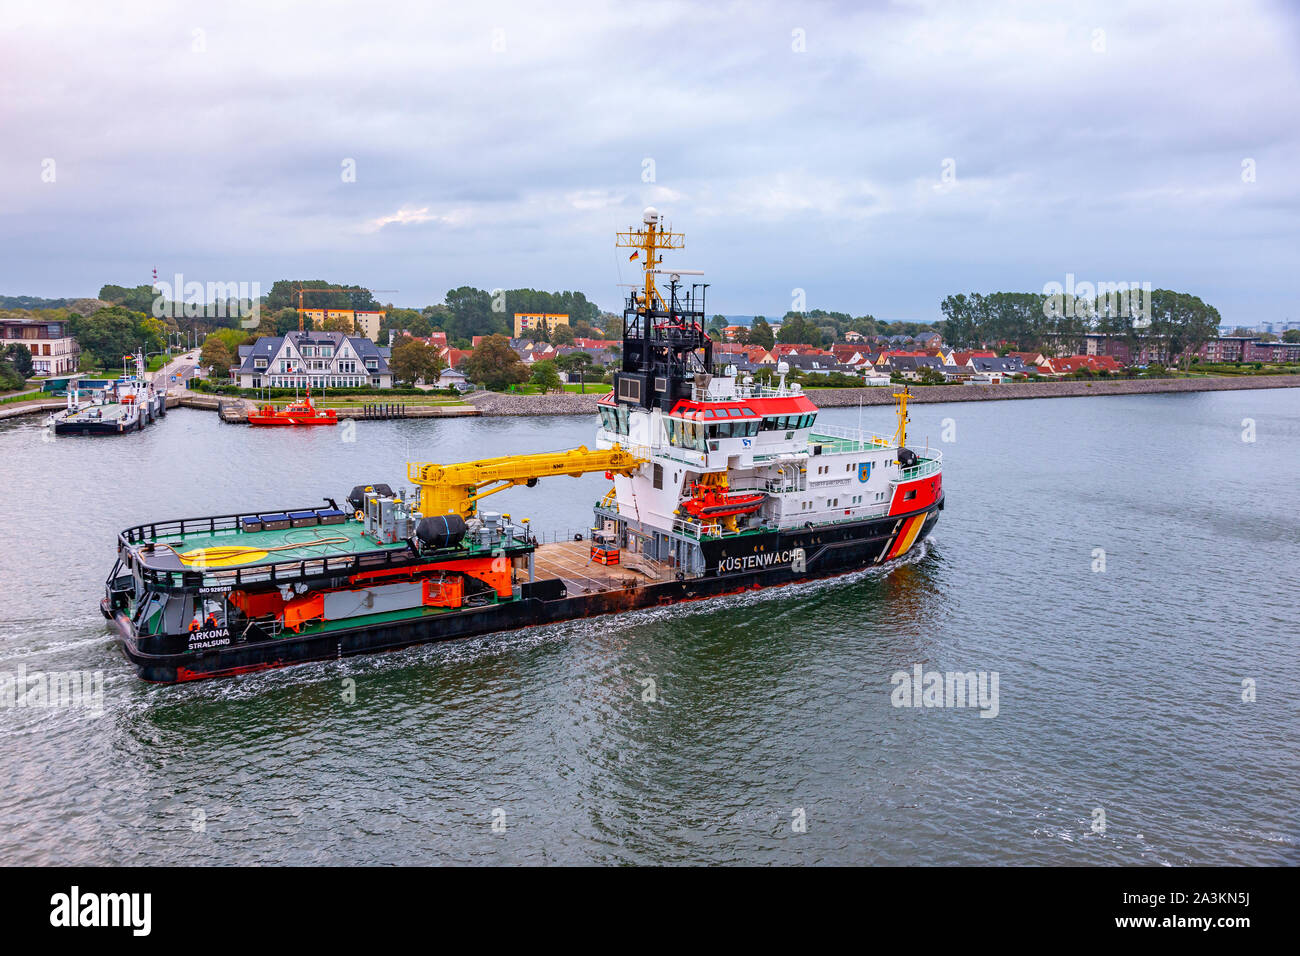 German ship Arkona, a pollution control vessel part of Kustenwache which is a association of several federal agencies, the ship is entering Warmemunde Stock Photo